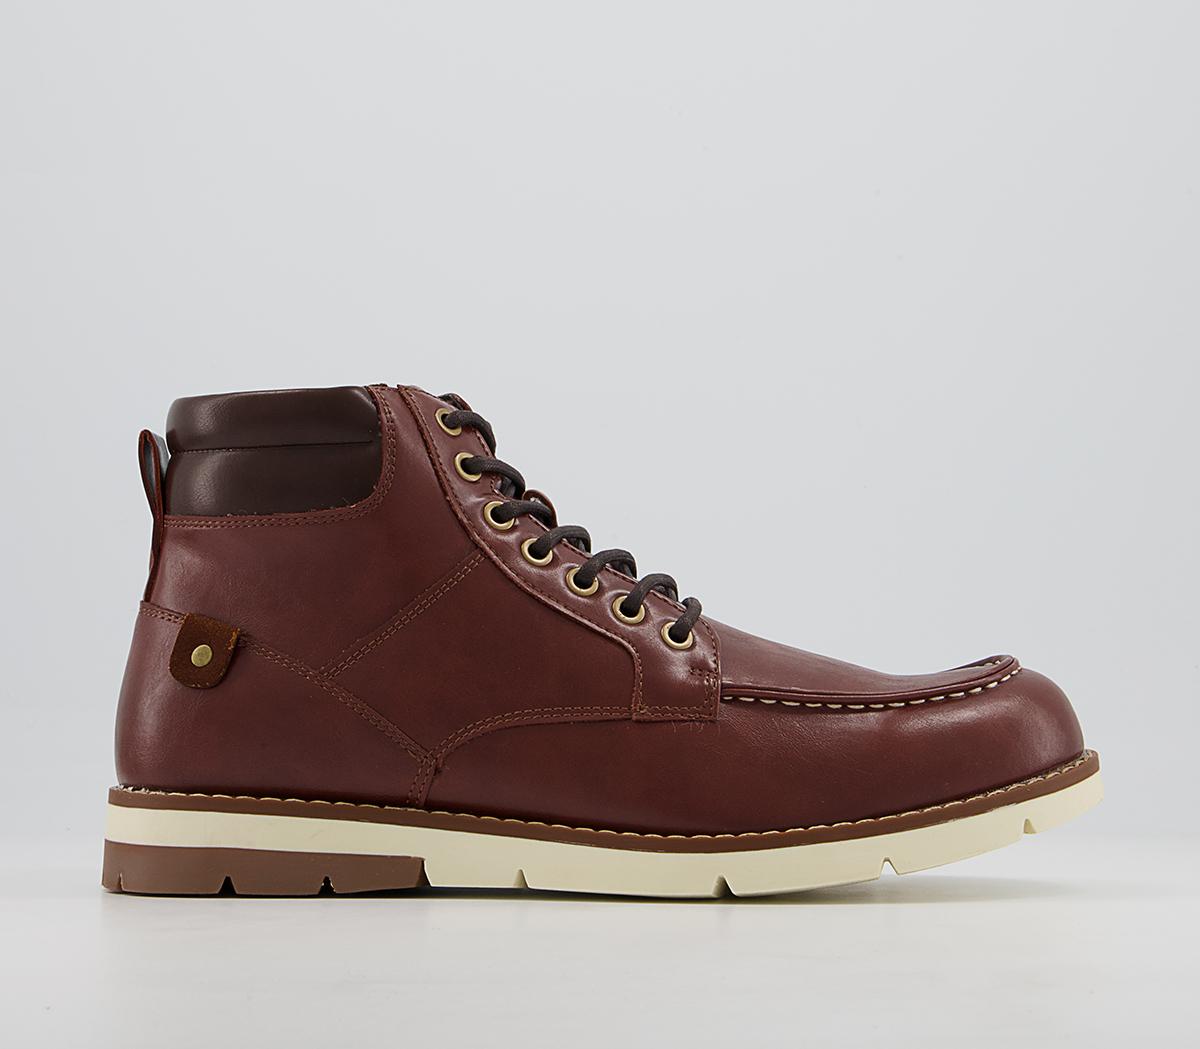 OfficeBlaney Apron Toe Mid BootsRed Brown